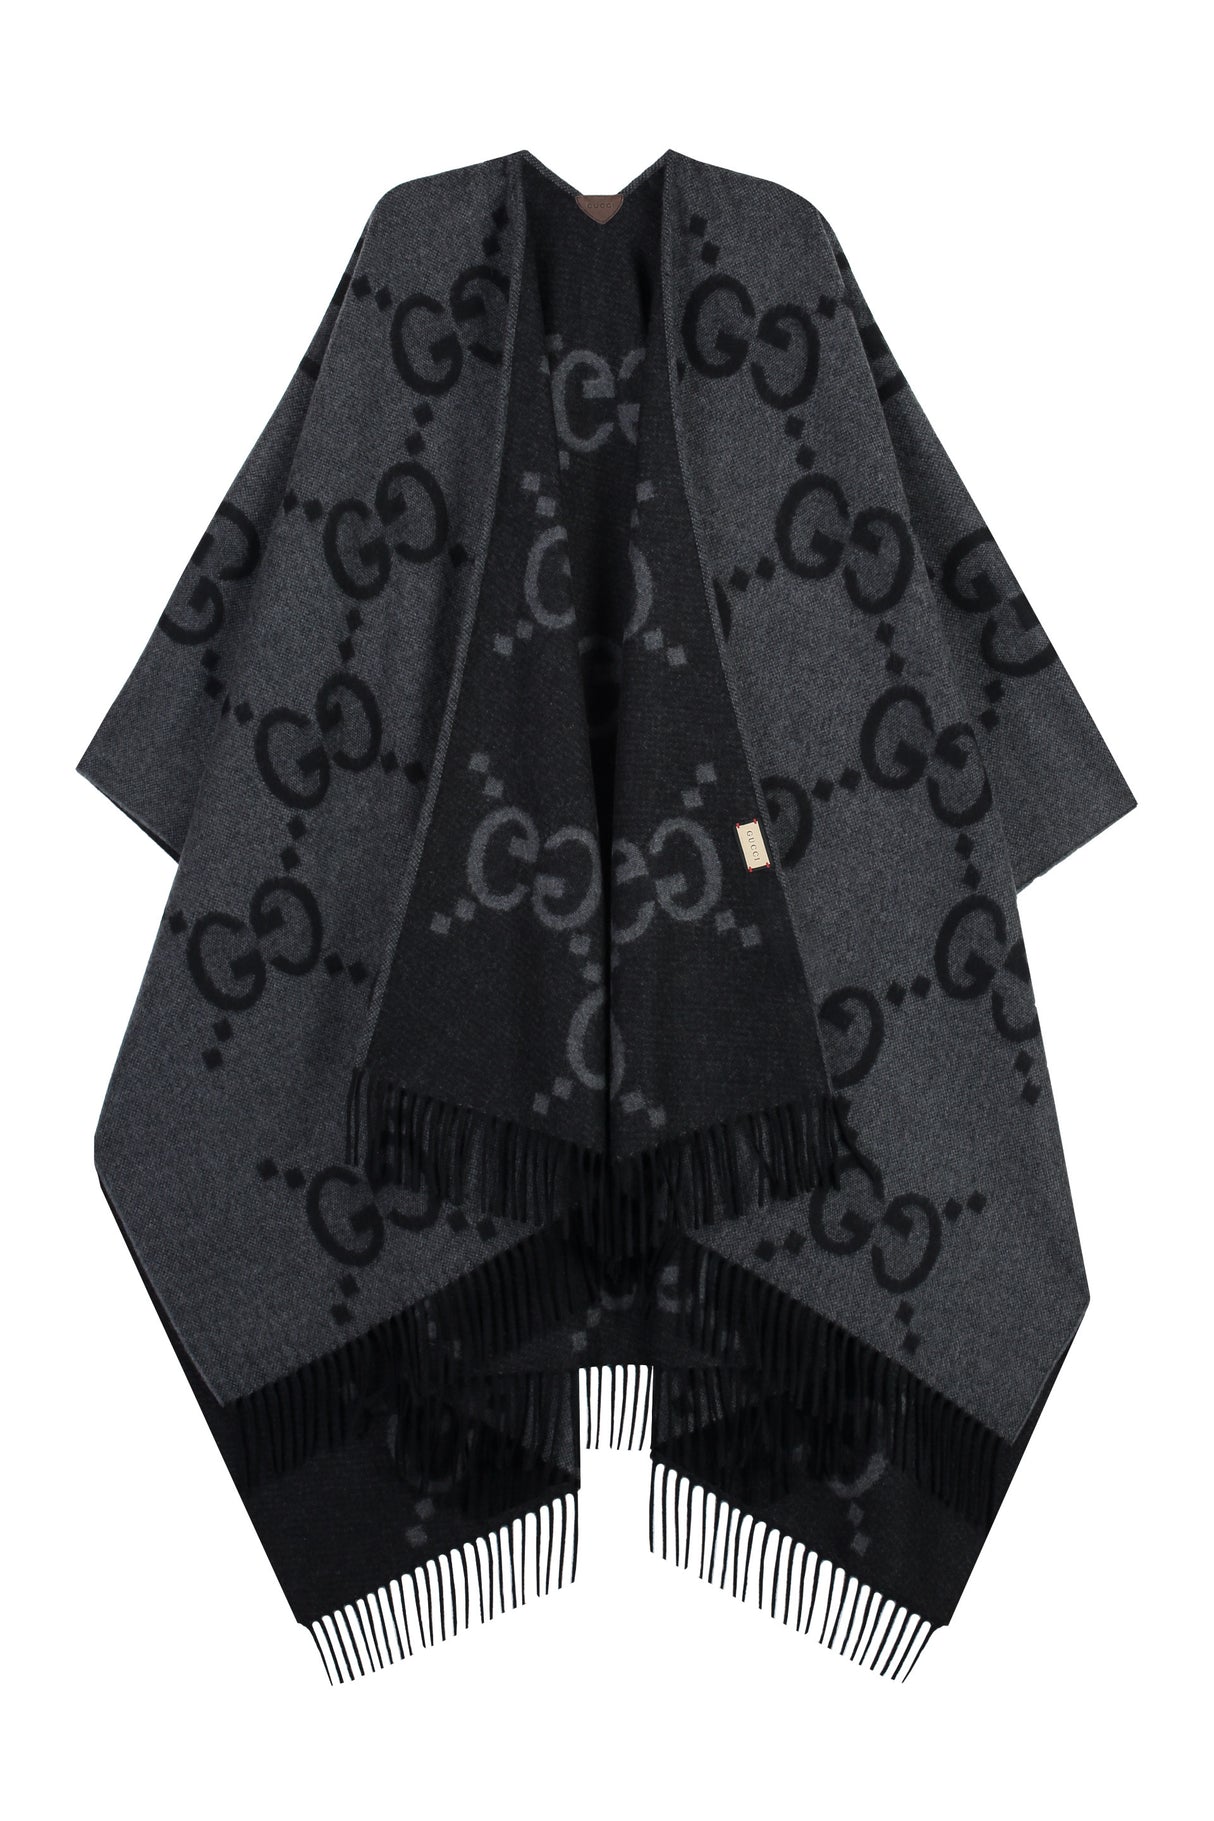 GUCCI Reversible Gray Cashmere Poncho with Leather Details for Women